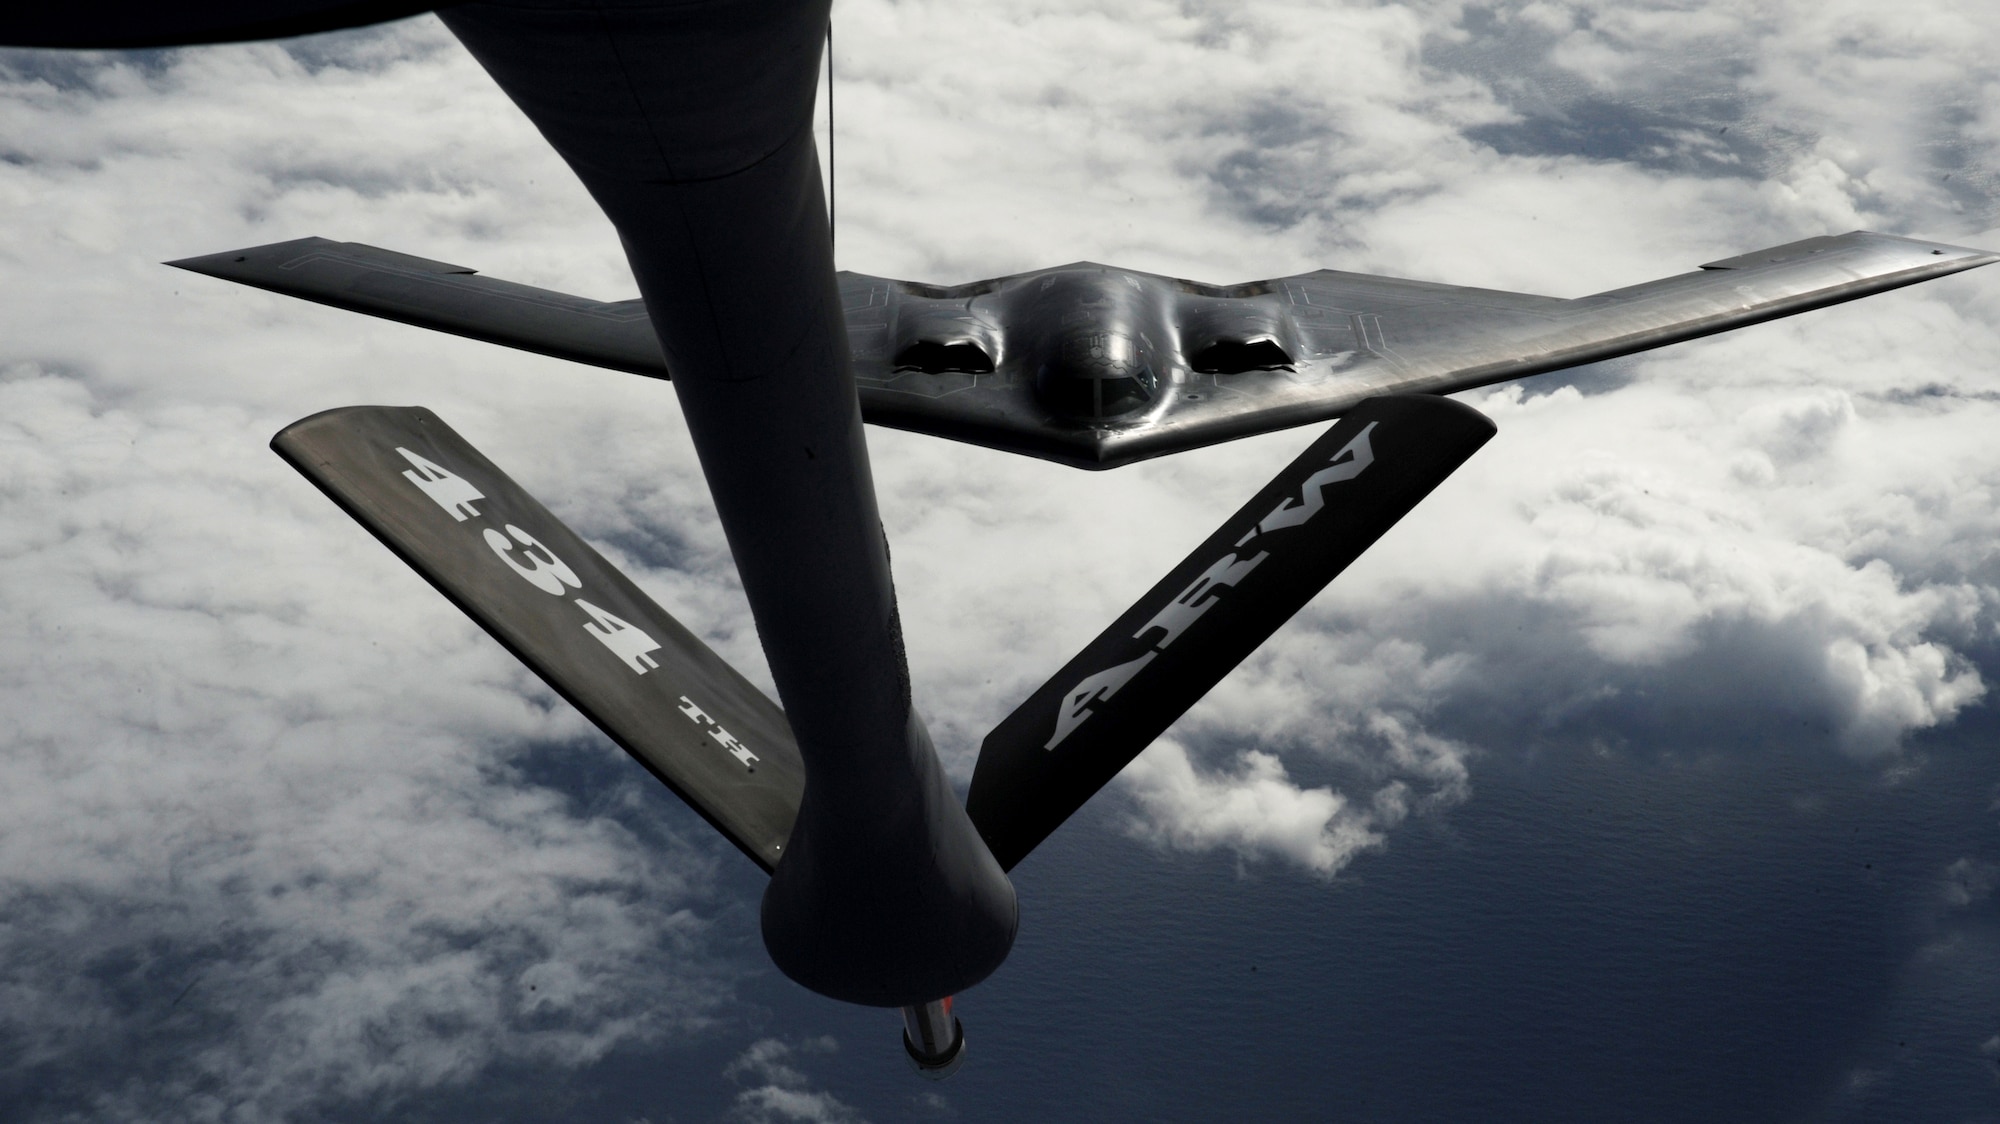 A B-2 Spirit from the 509th Bomb Wing, 13th Bomb Squadron Whiteman Air Force Base, Mo., positions to refuel from a KC-135 Stratotanker over the Pacific Ocean March 10. More than 270 Airmen and four B-2 Spirits are deployed to Andersen as part of a Continuous Bomber Presence in the region. Pacific theater refueling operations are being conducted by 434th Air Refueling Wing, Grissom Air Reserve Base, Ind.

(U.S. Air Force photo/ Master Sgt. Kevin J. Gruenwald) released

























  












 











































  












 

























